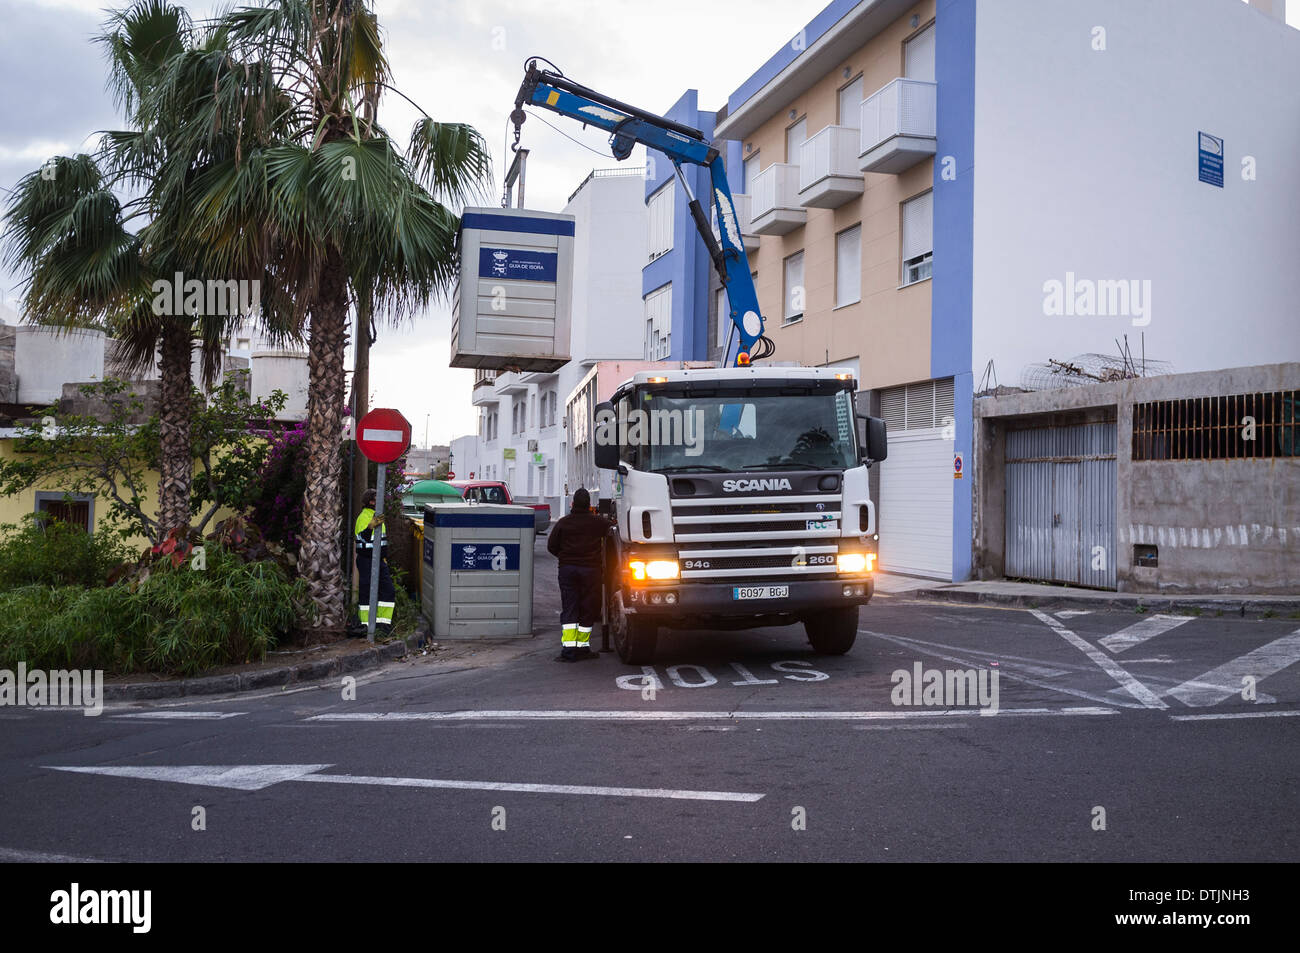 Guia de Isora council rubbish truck collecting paper recycling container from a street in Playa San juan, Tenerife, Stock Photo